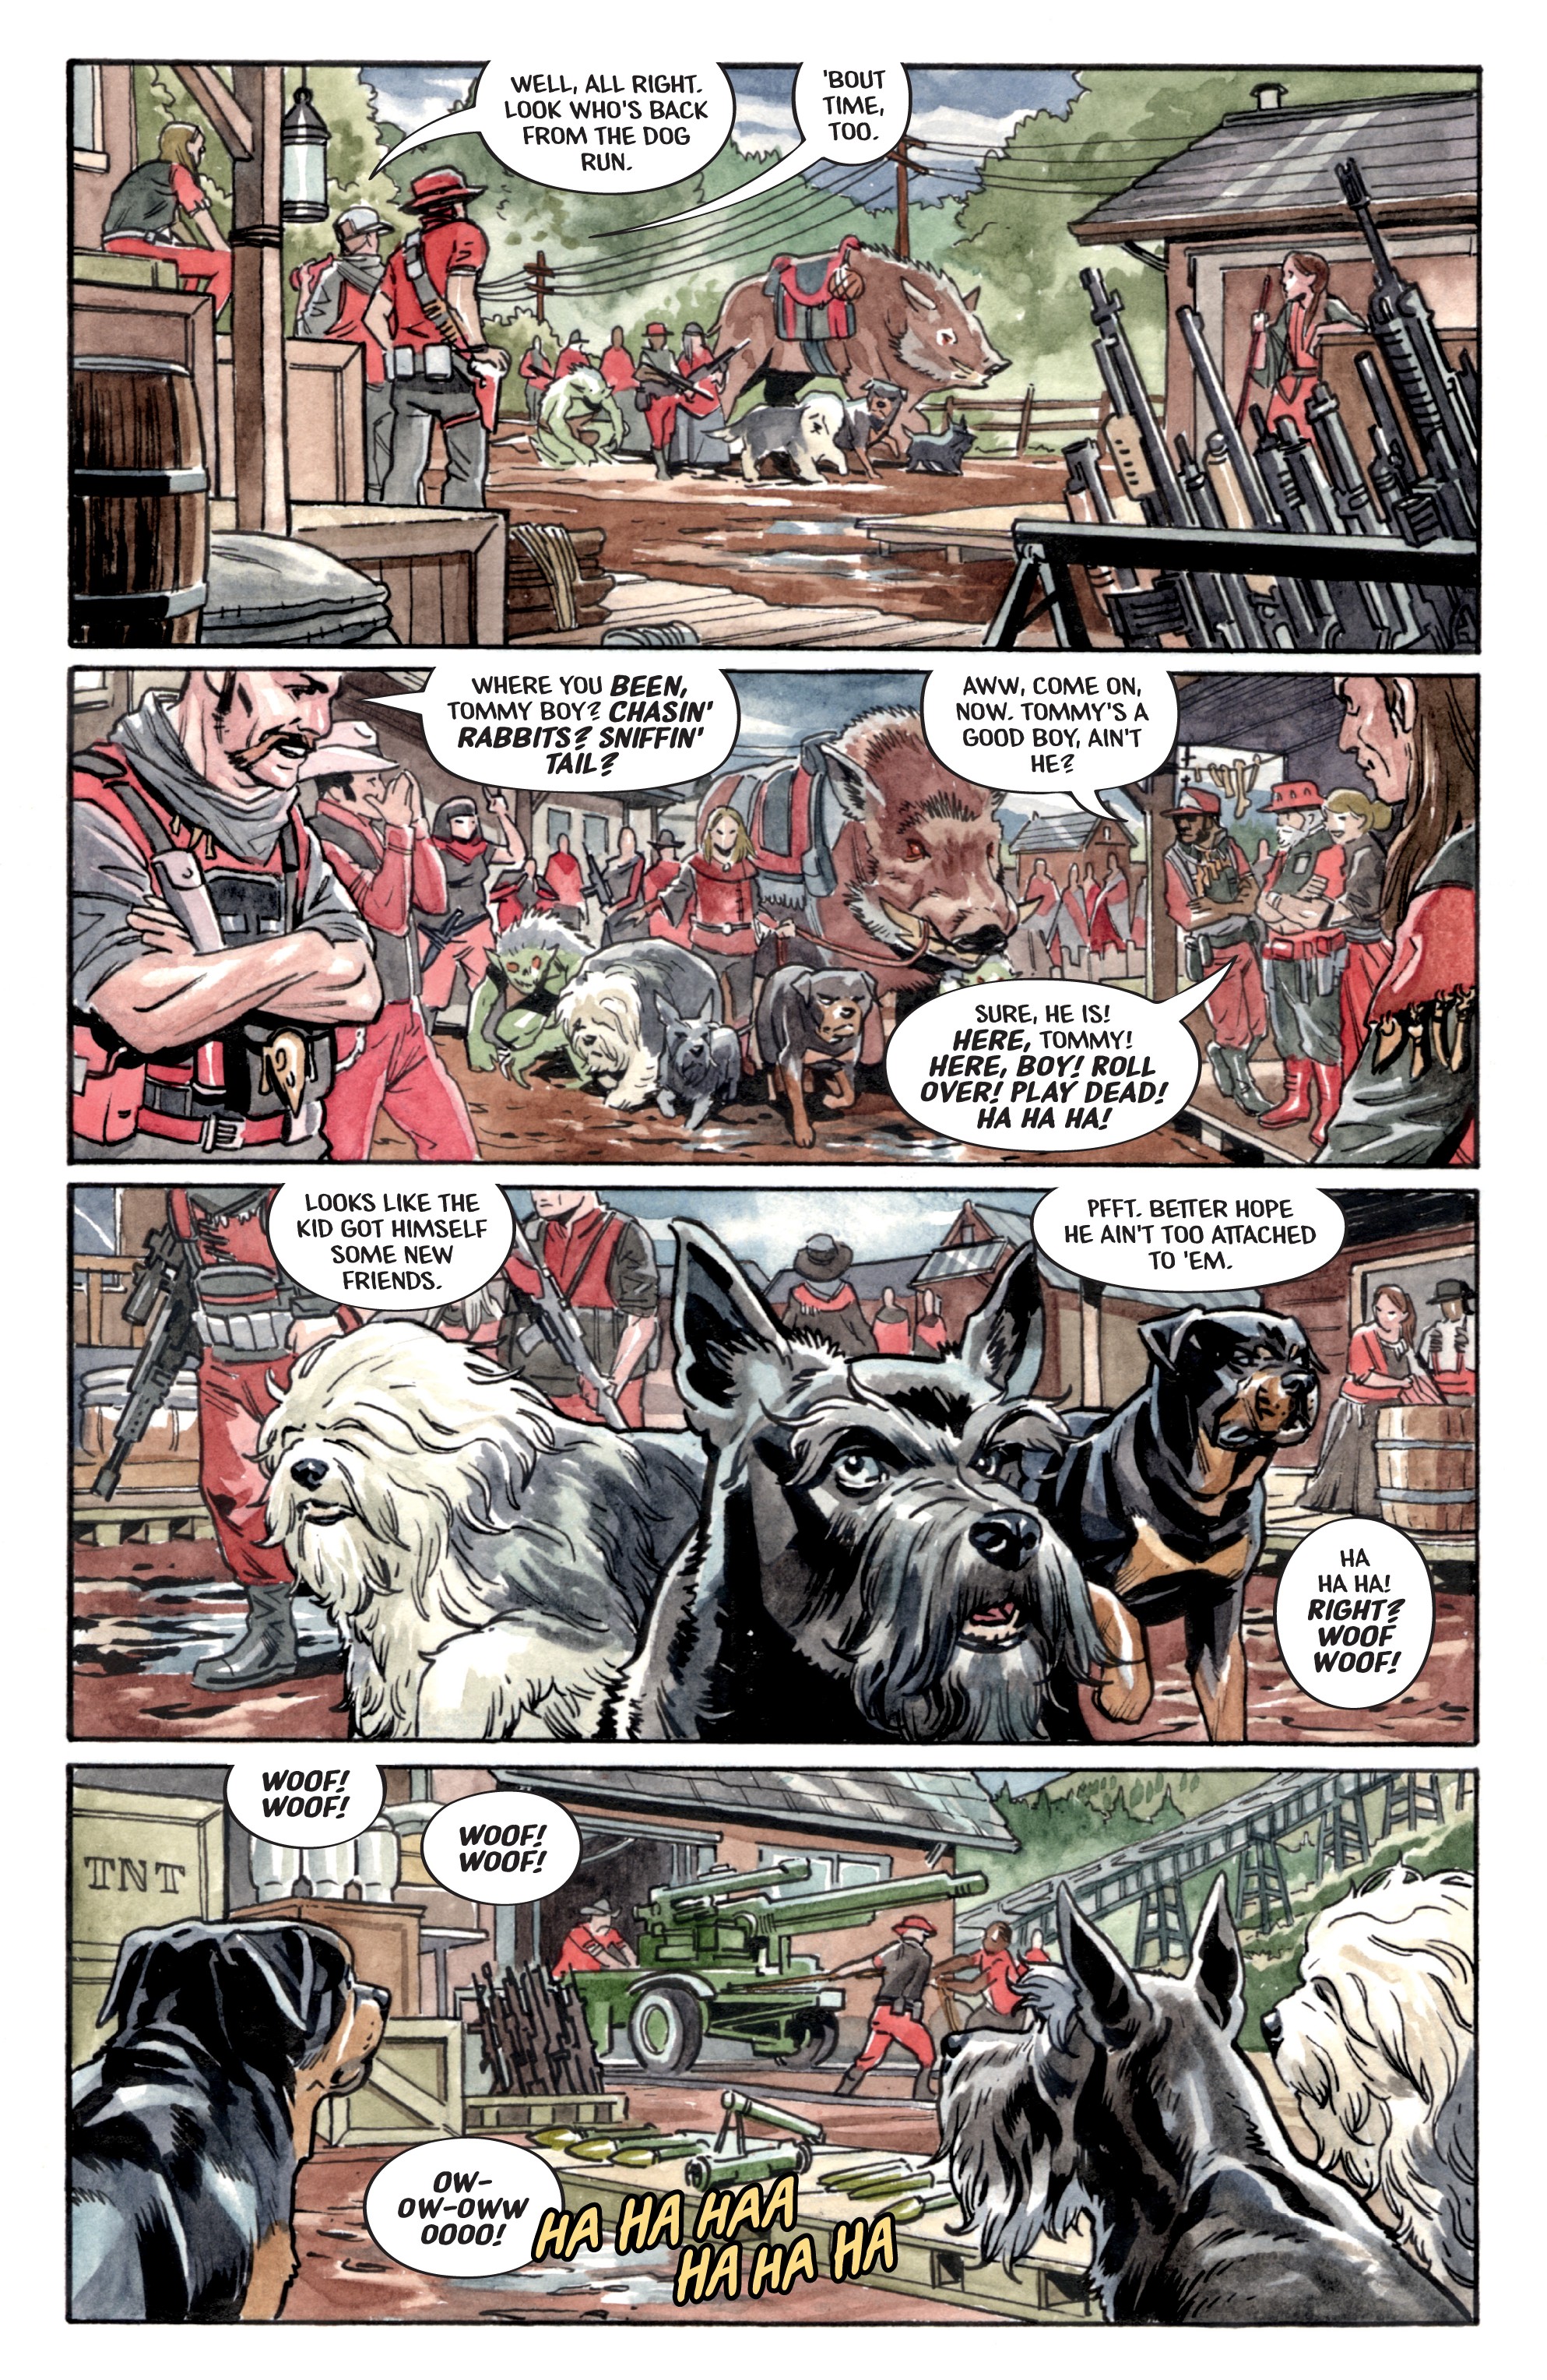 Beasts of Burden: Wise Dogs and Eldritch Men  (2018-): Chapter 4 - Page 3